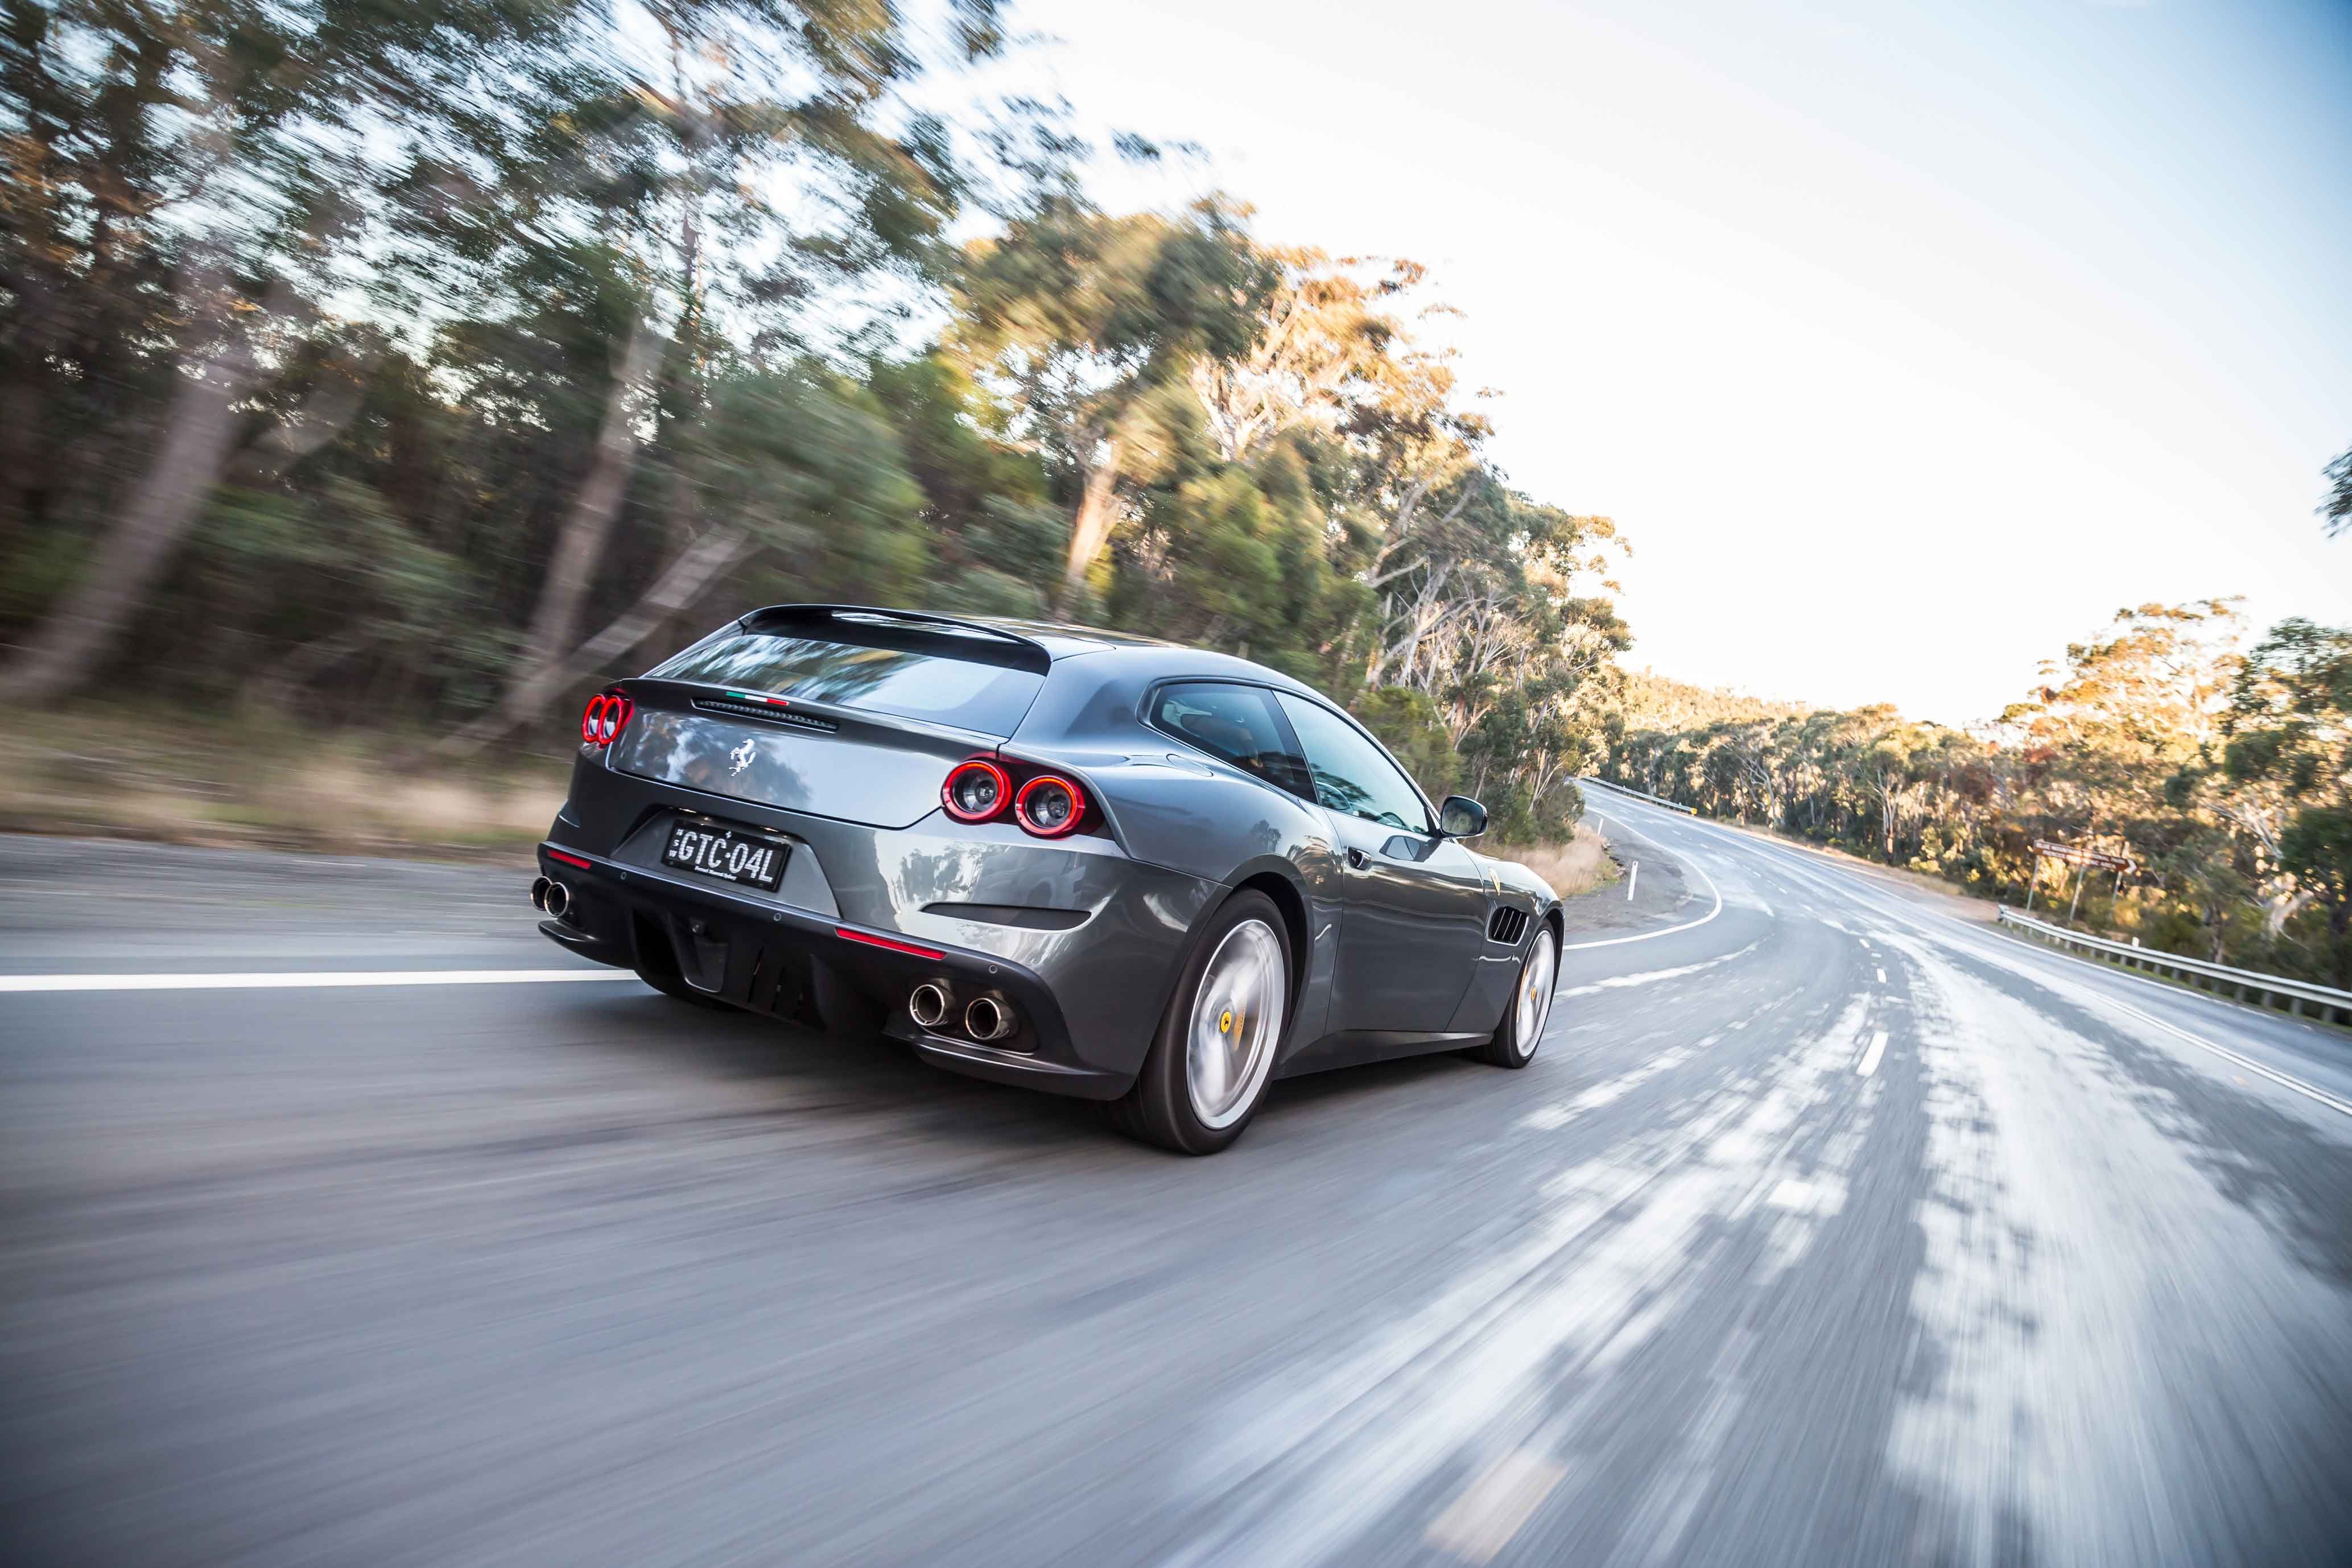 2020 Ferrari Gtc4Lusso Review, Pricing, And Specs